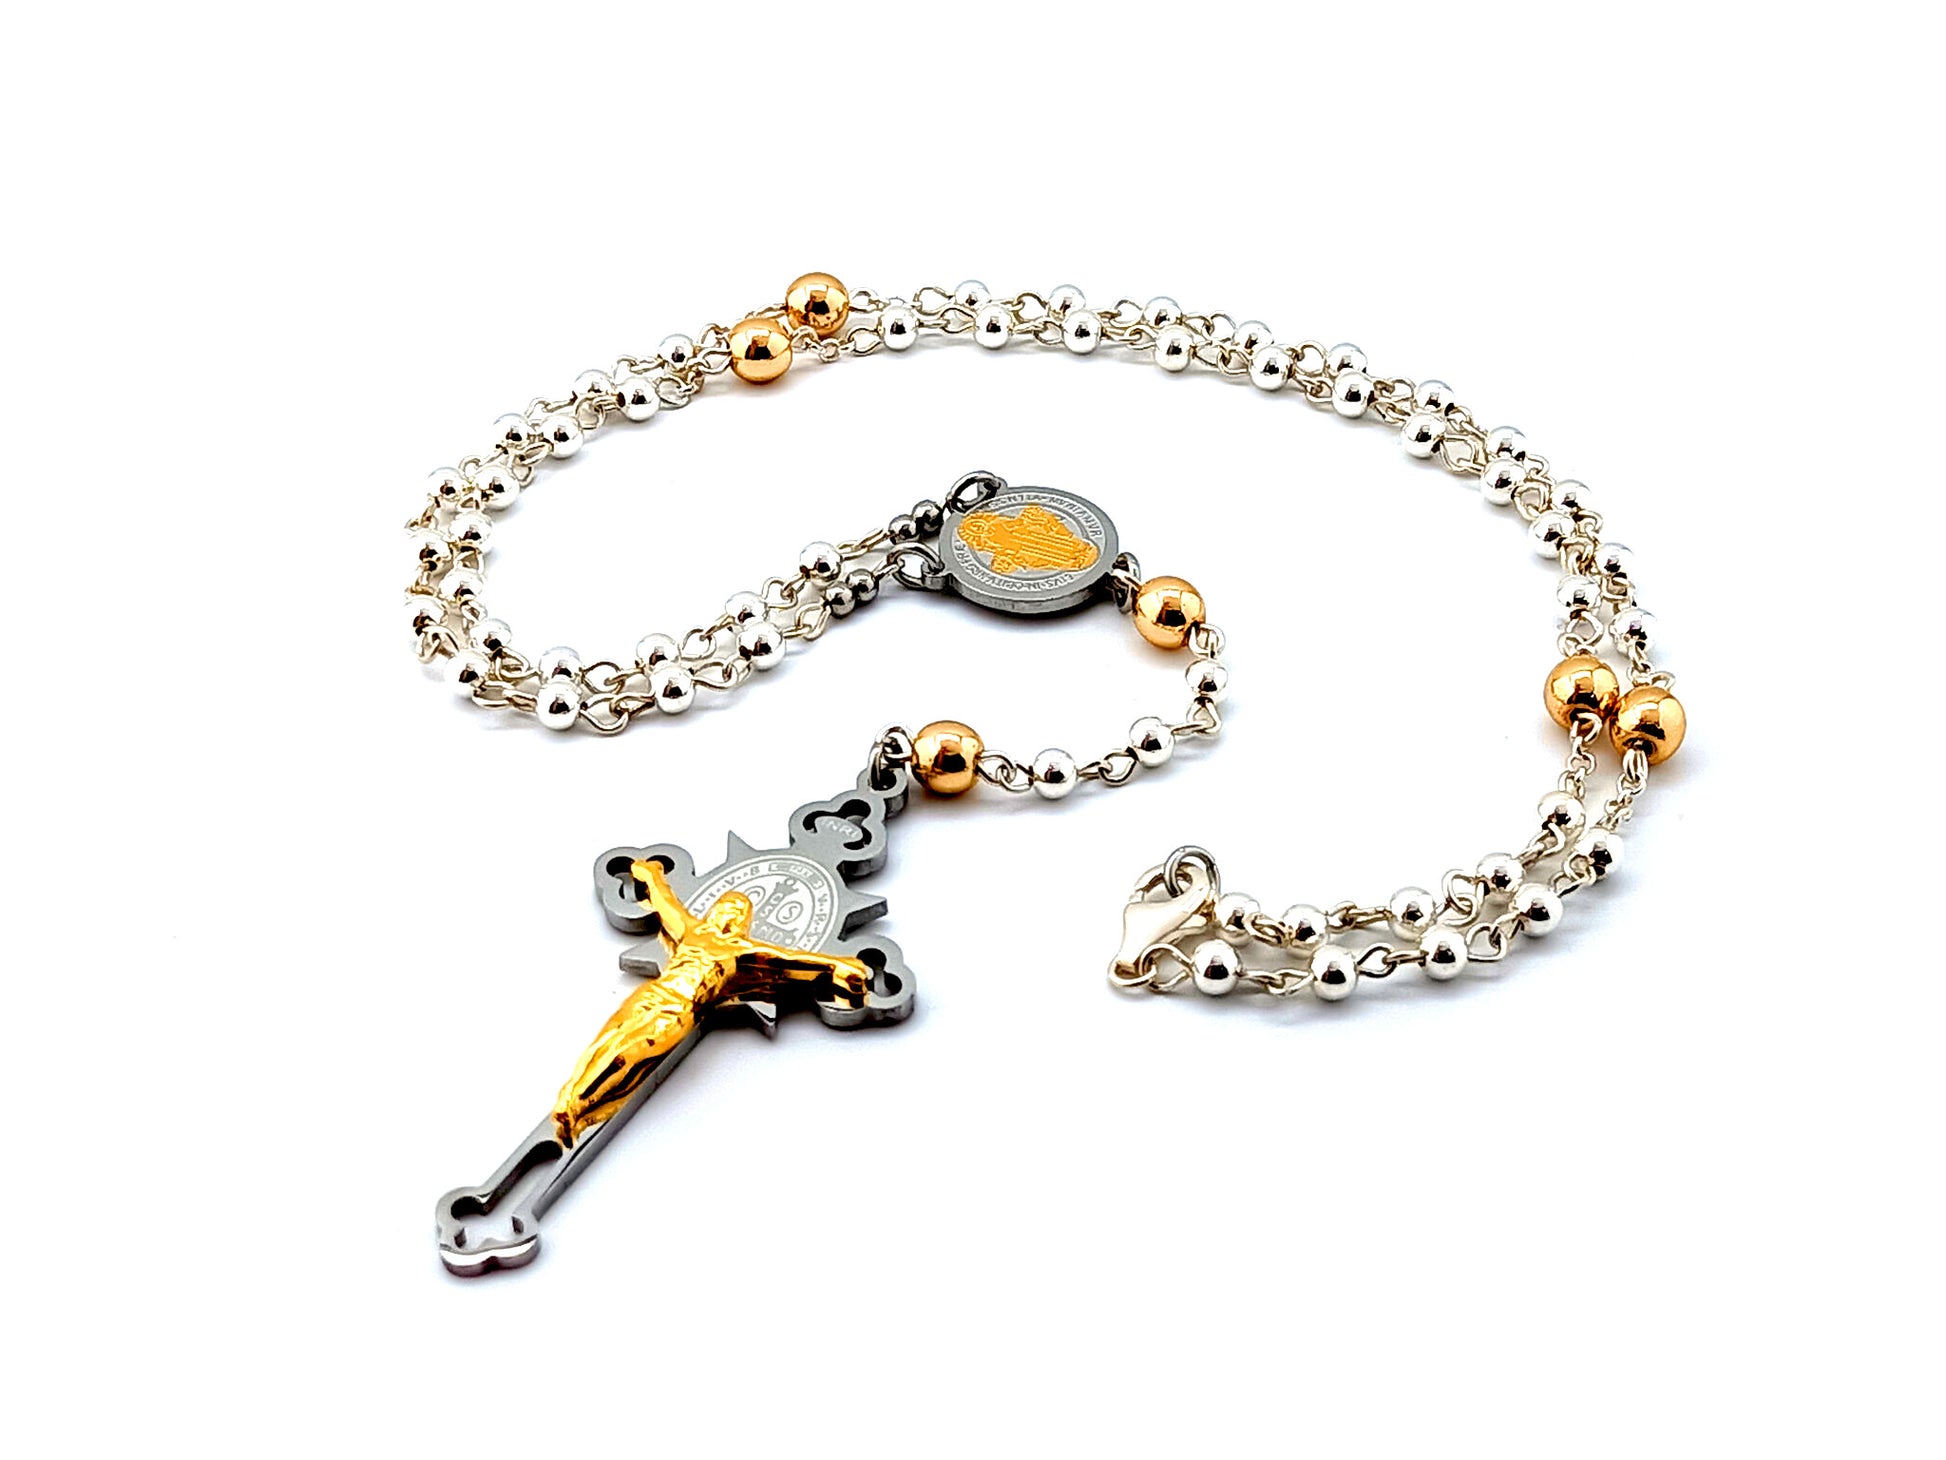 Saint Benedict unique rosary beads with sterling silver and hematite gemstone beads and engraved stainless steel crucifix.